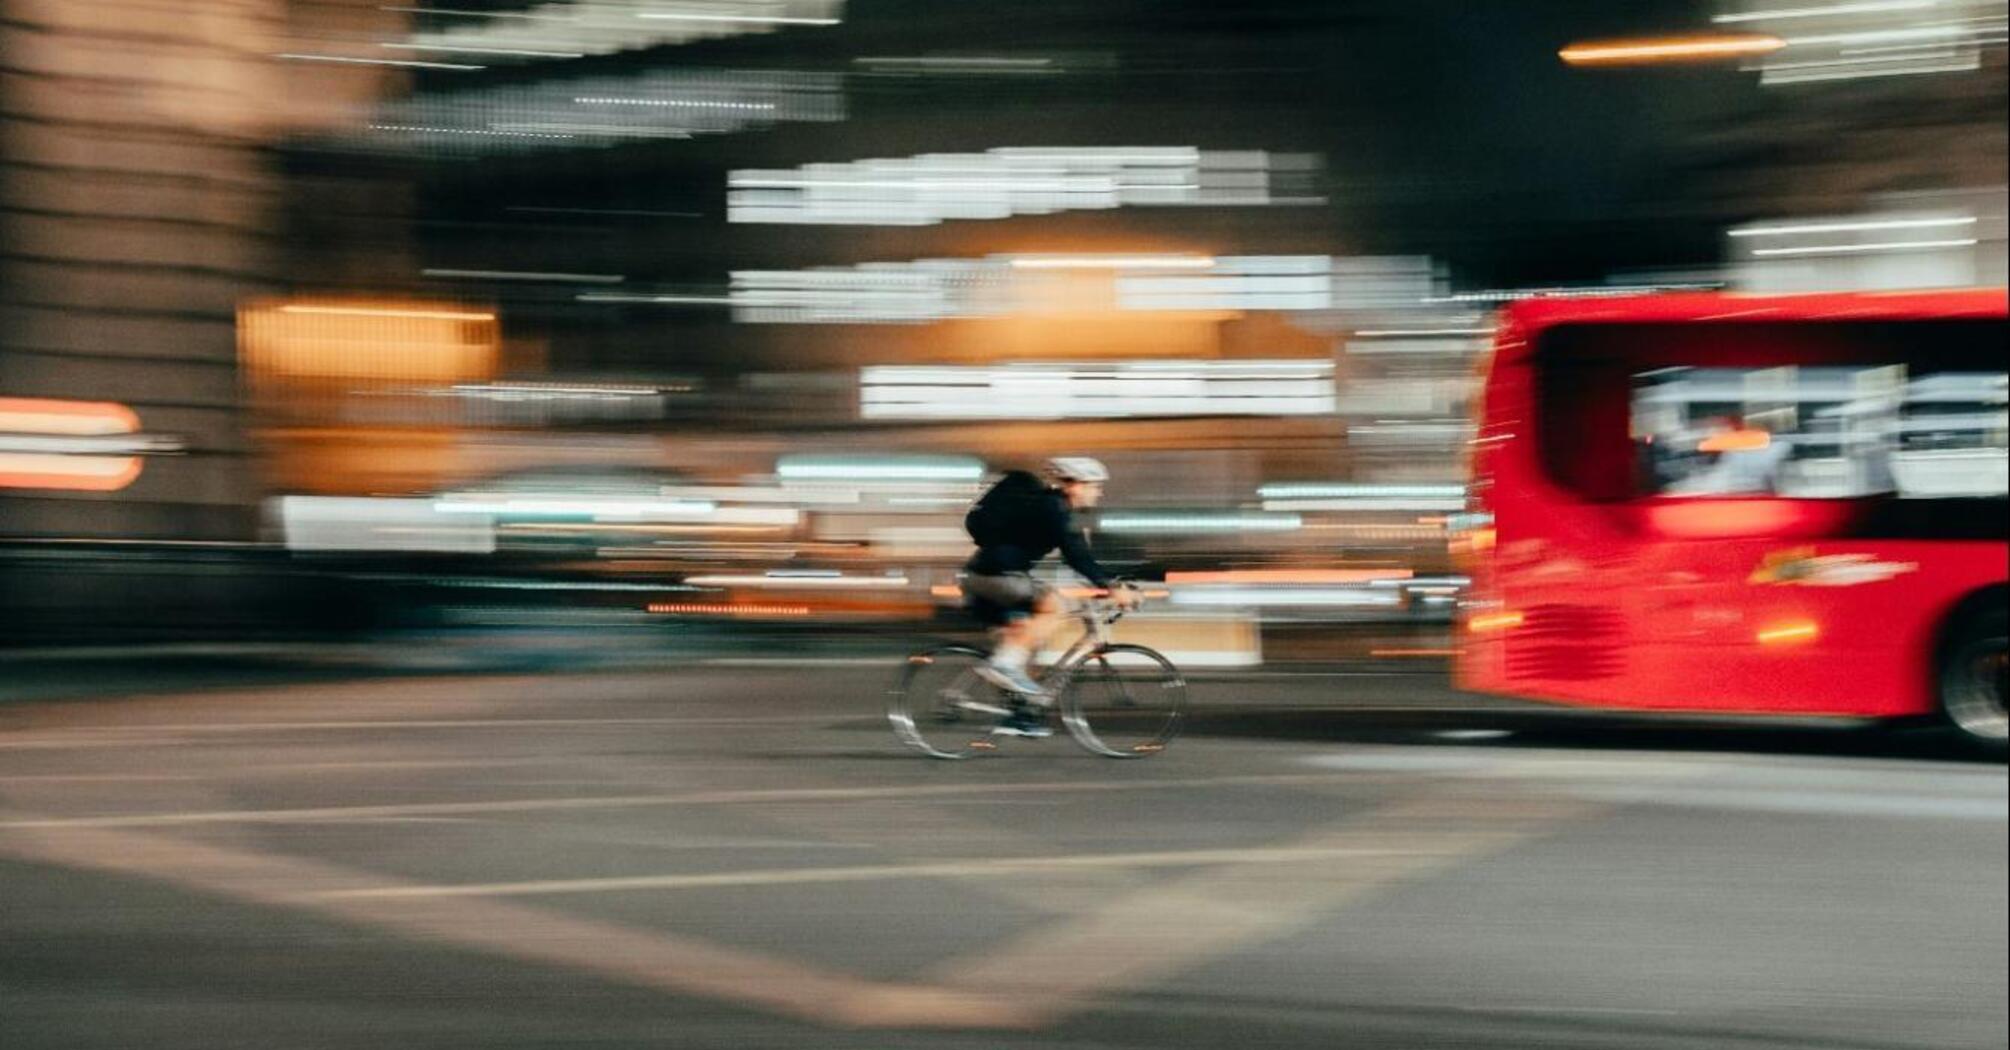 A cyclist riding past a red bus at night in a city with blurred lights